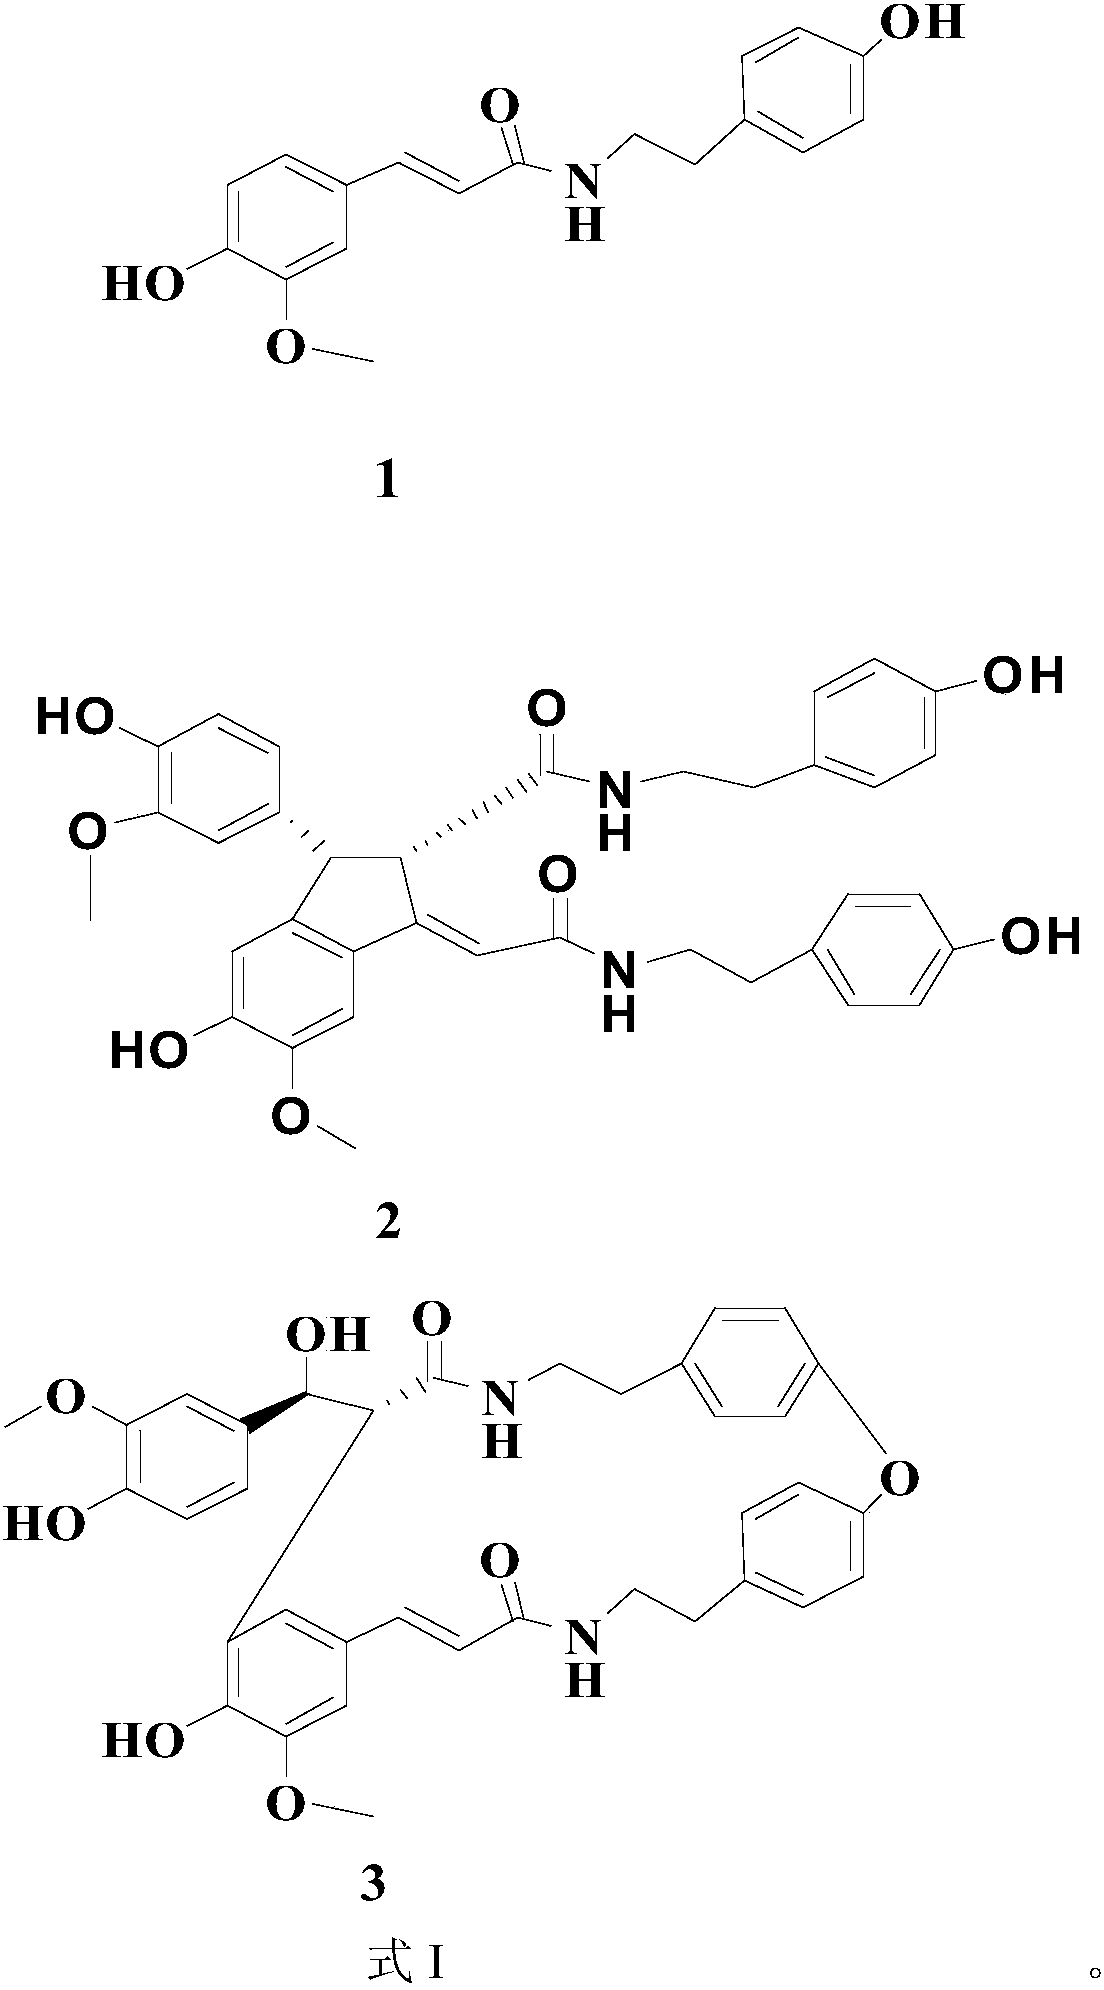 Application of ferulamide compound in preparation of anticomplementary drugs